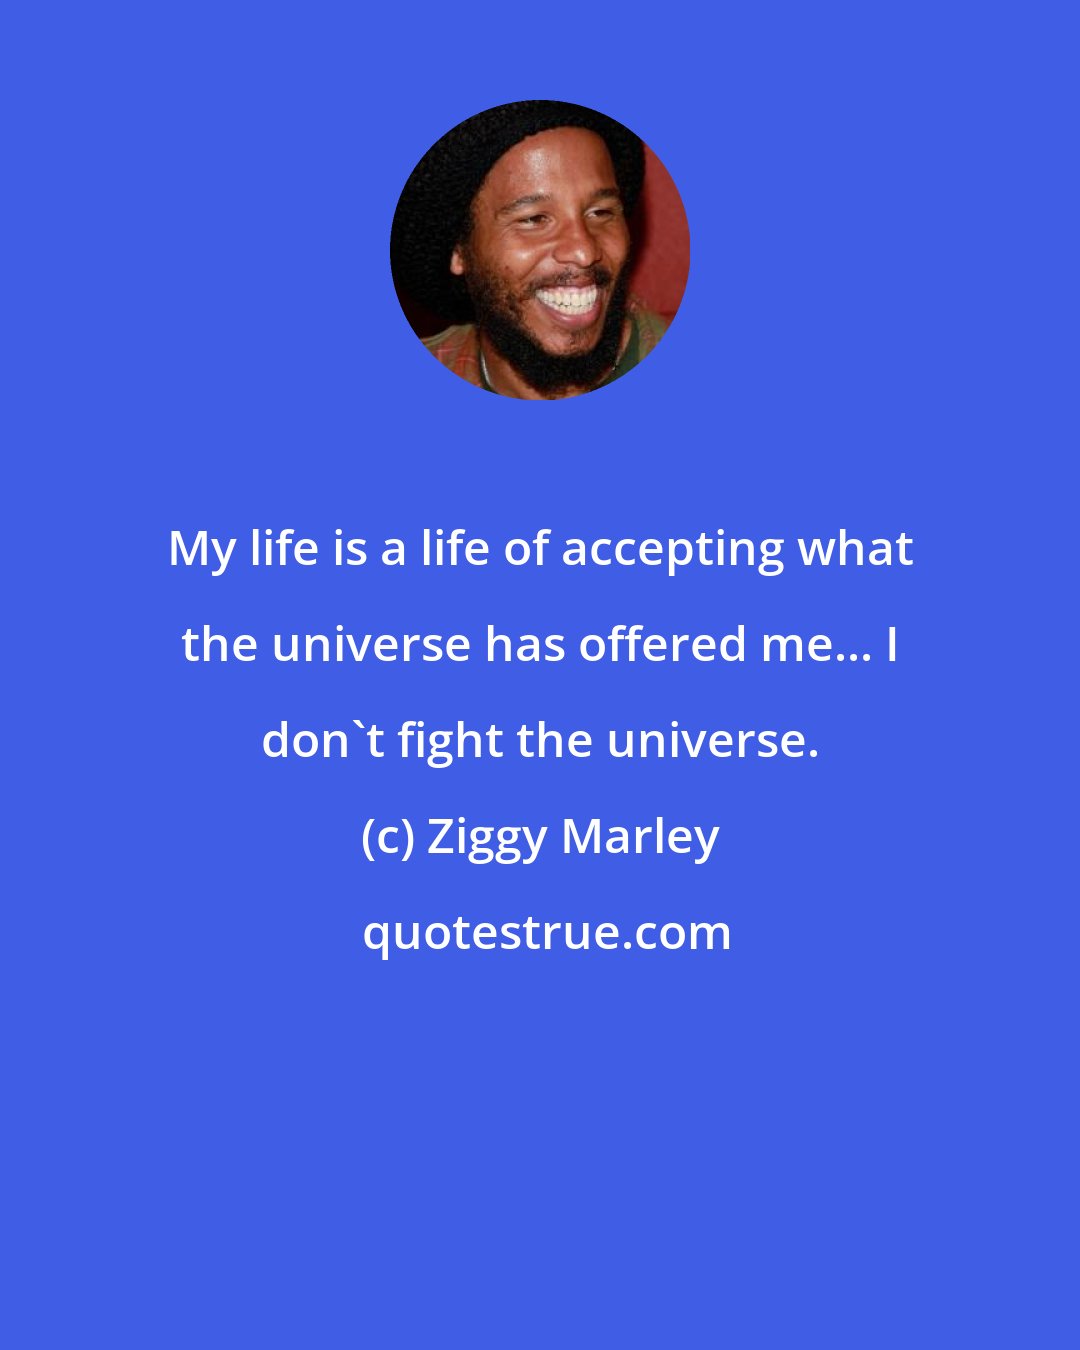 Ziggy Marley: My life is a life of accepting what the universe has offered me... I don't fight the universe.